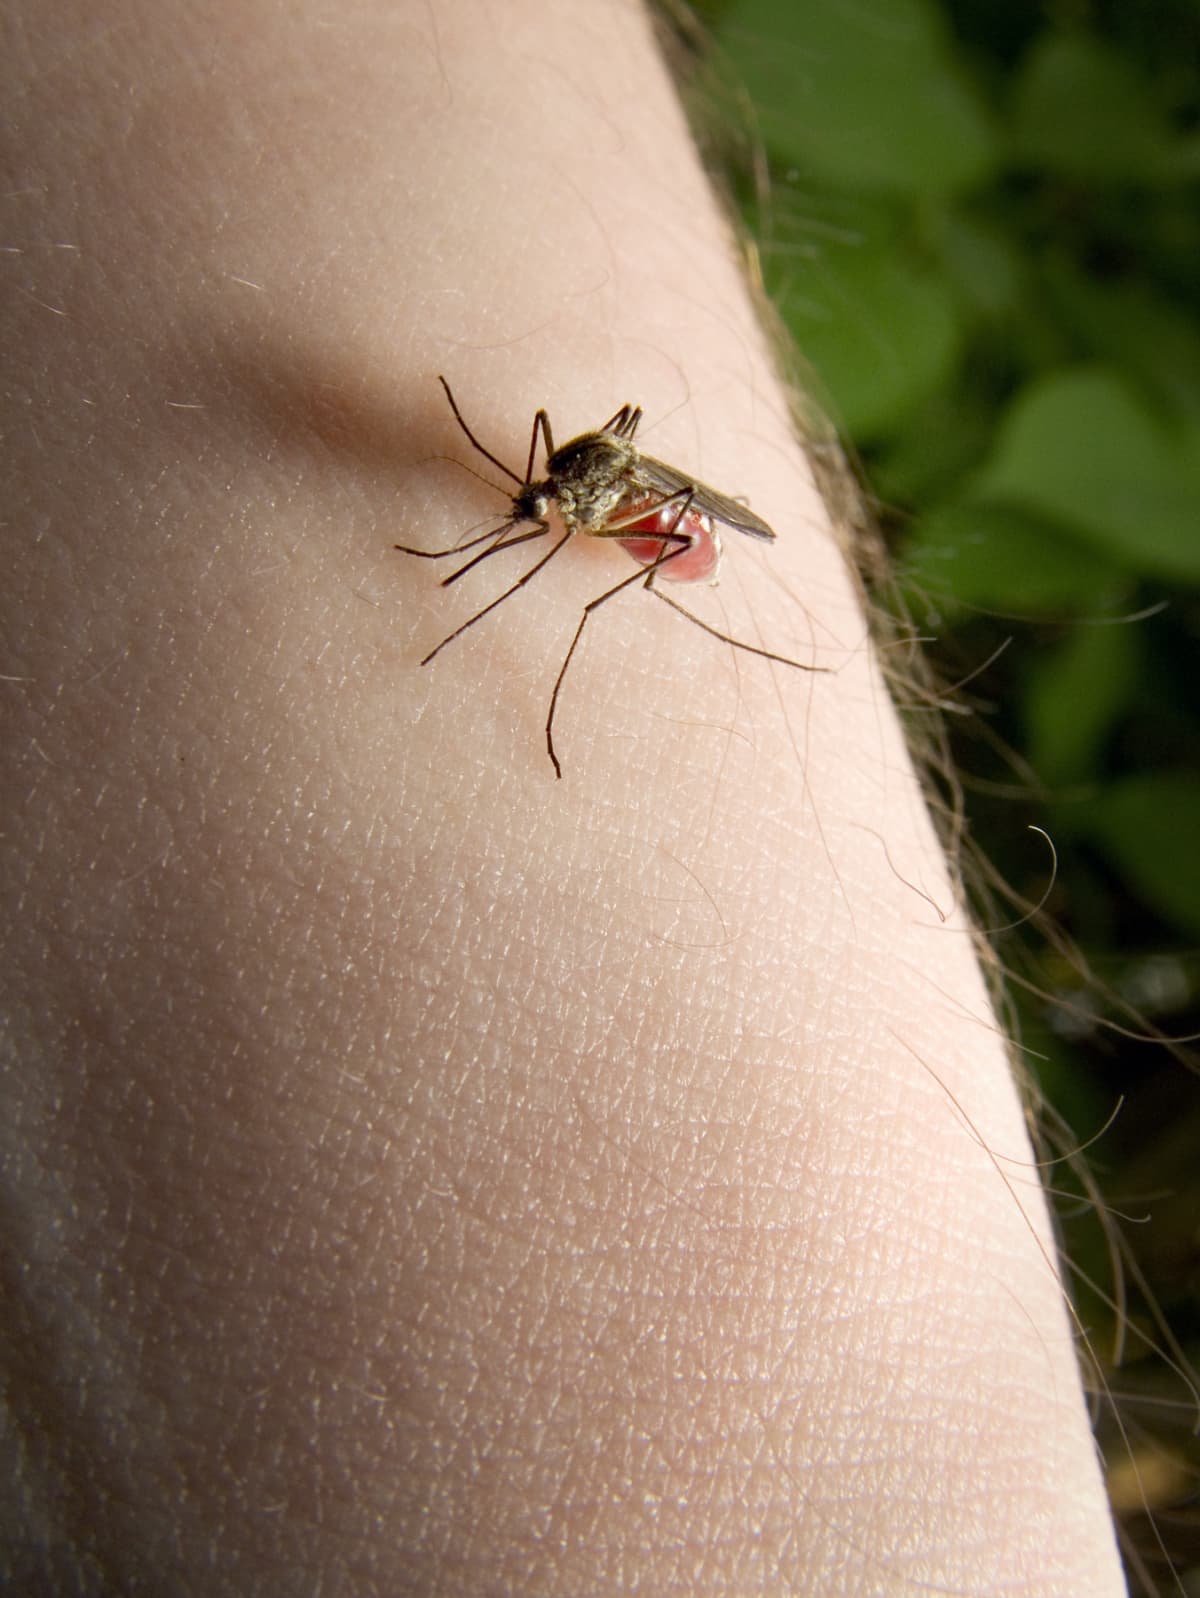 A mosquito biting a person